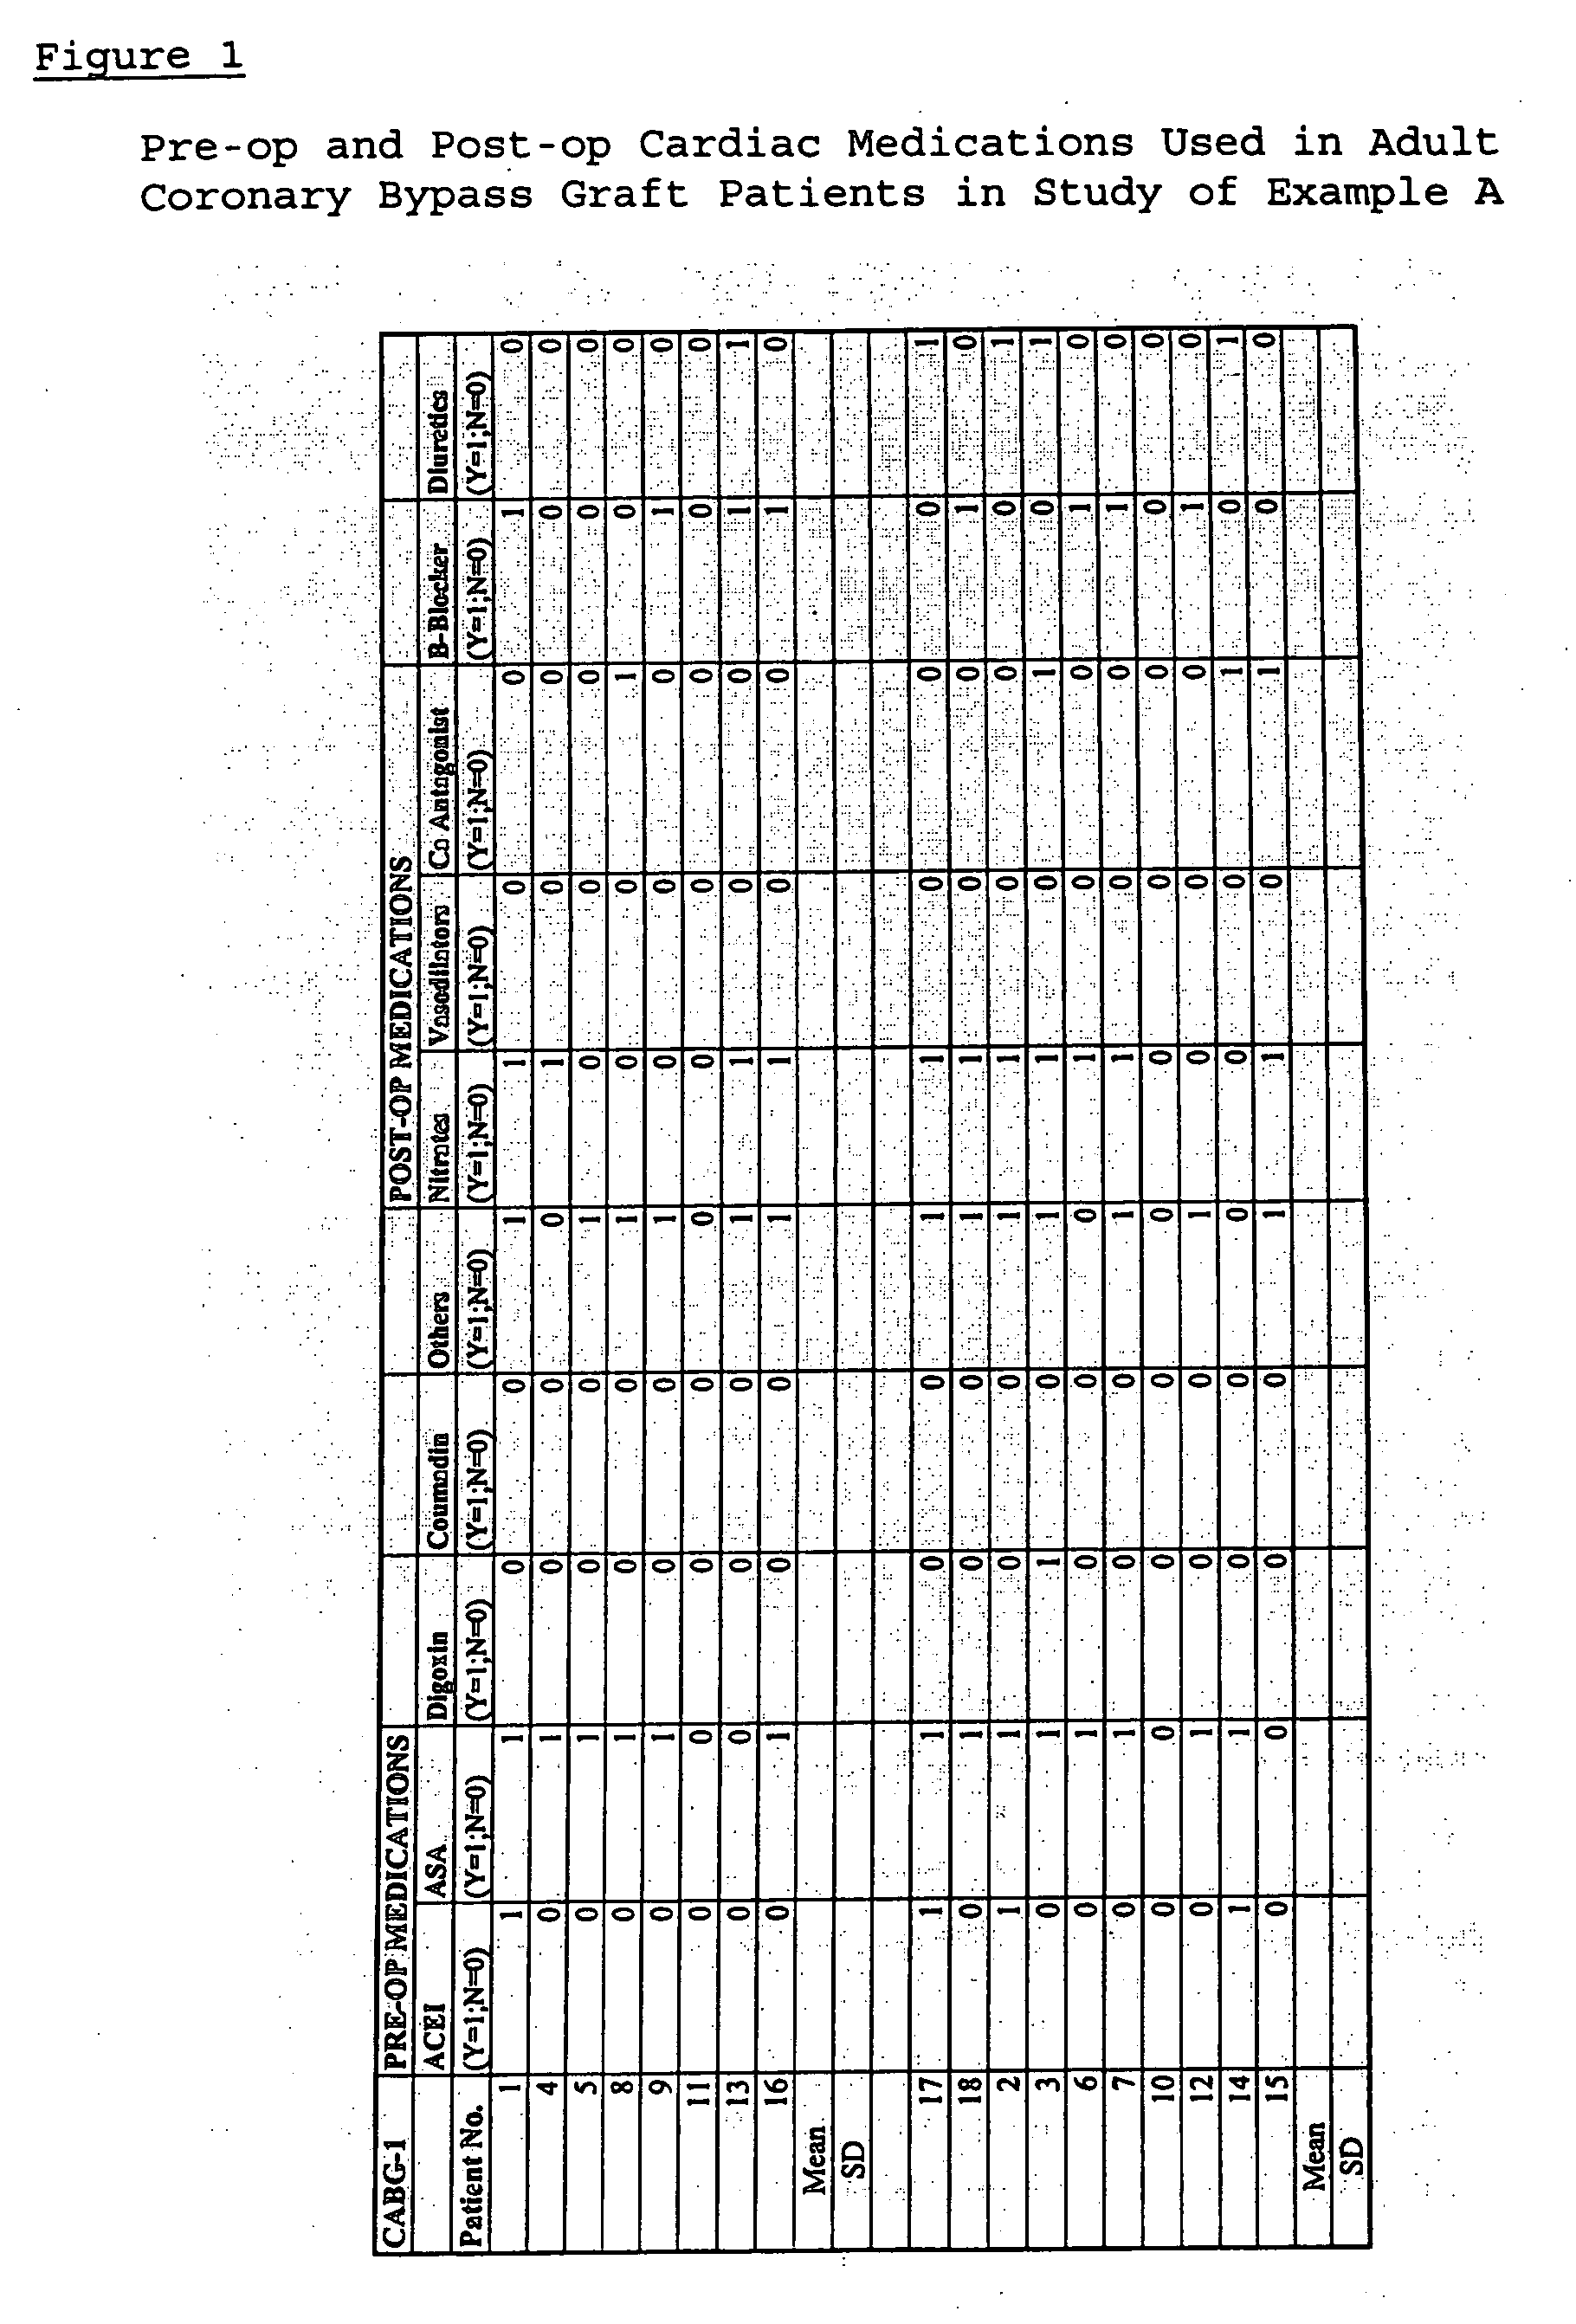 Methods of cardioprotection using dichloroacetate in combination with an inotrope